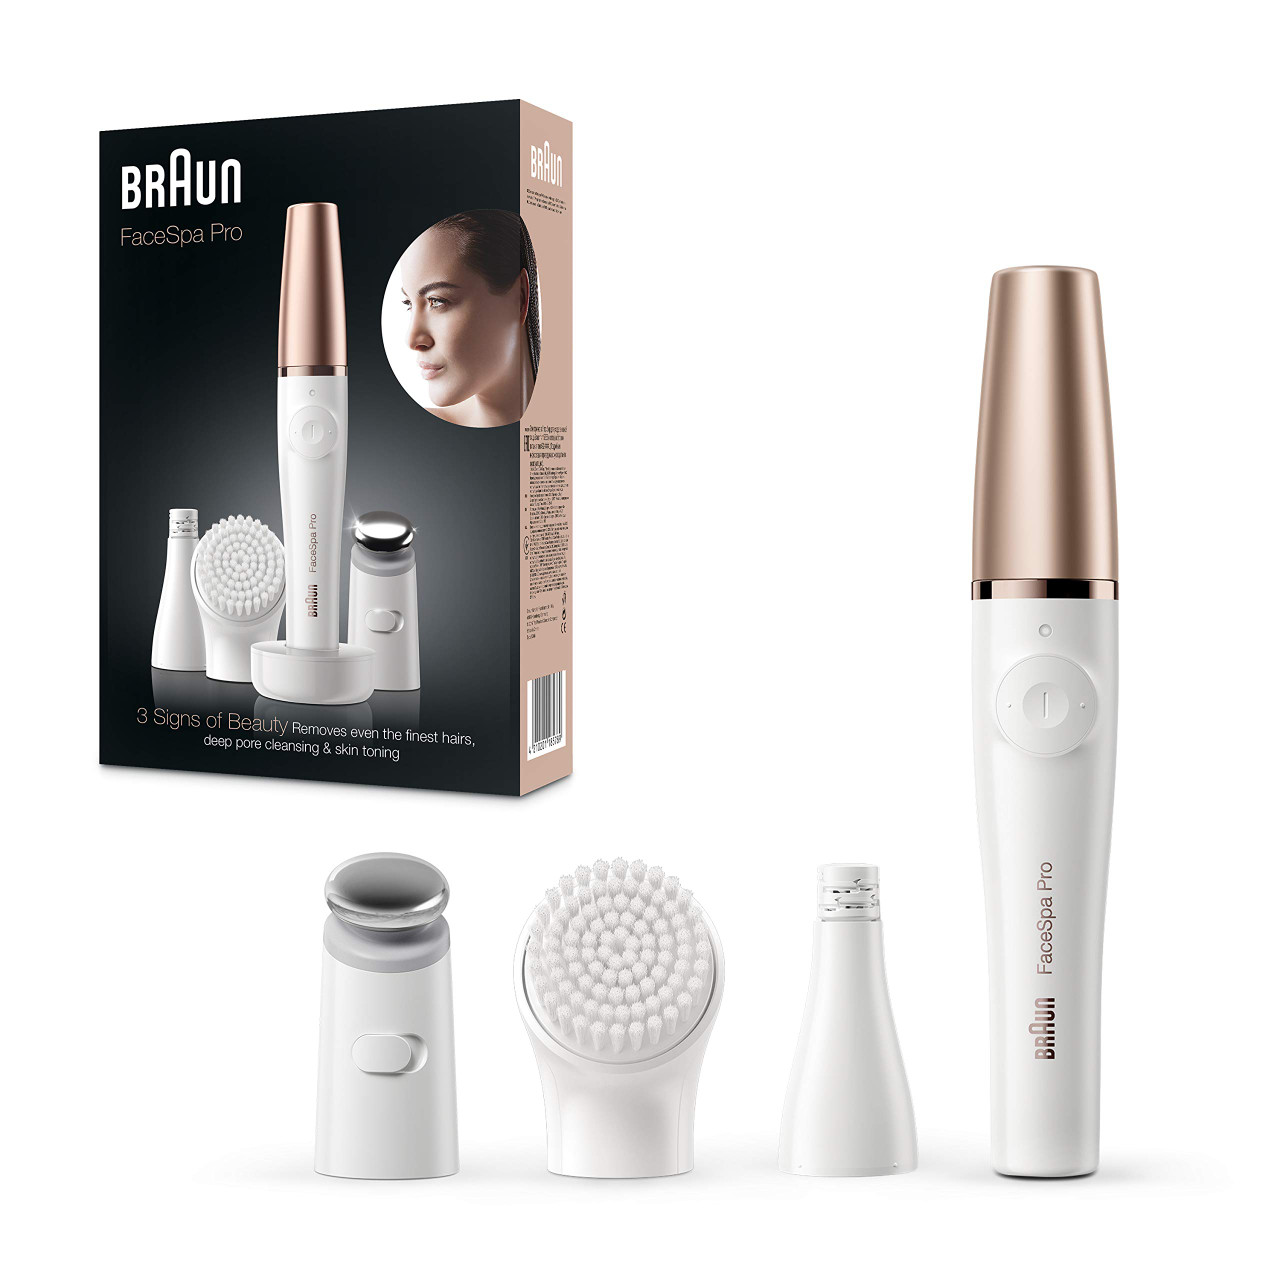 Braun Face 810 Facial Epilator 2 in 1 Hair Remover and Facial Cleanser  With Additional Brush Buy Braun Face 810 Facial Epilator 2 in 1 Hair  Remover and Facial Cleanser With Additional